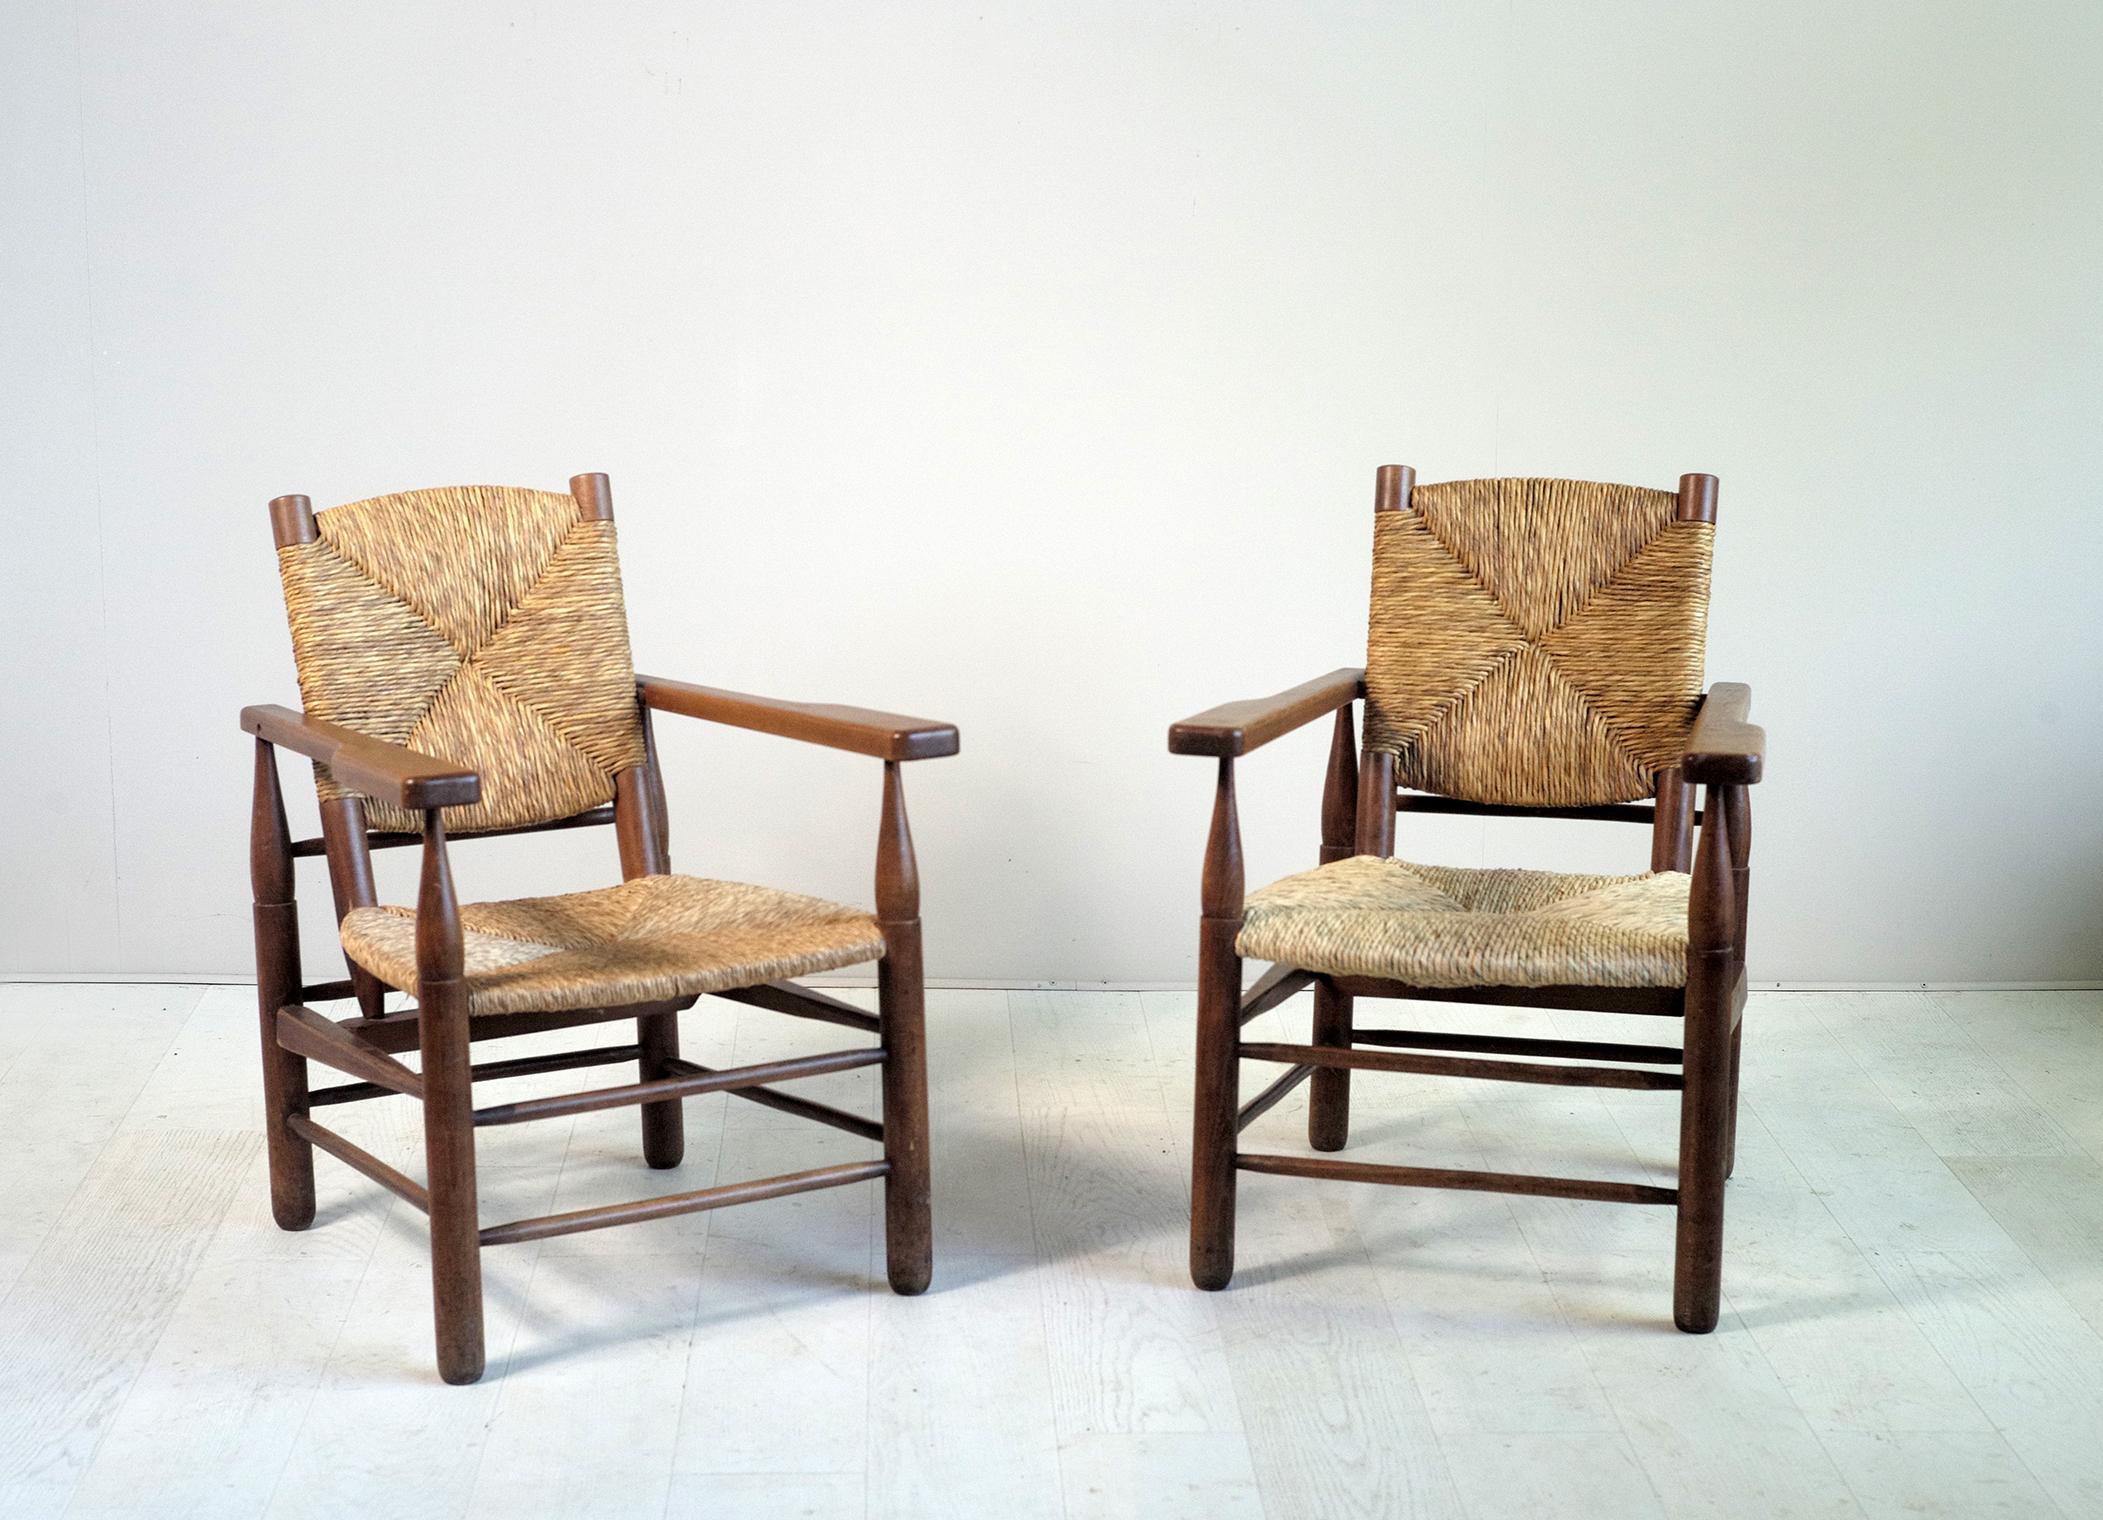 Exceptional pair of chair called 